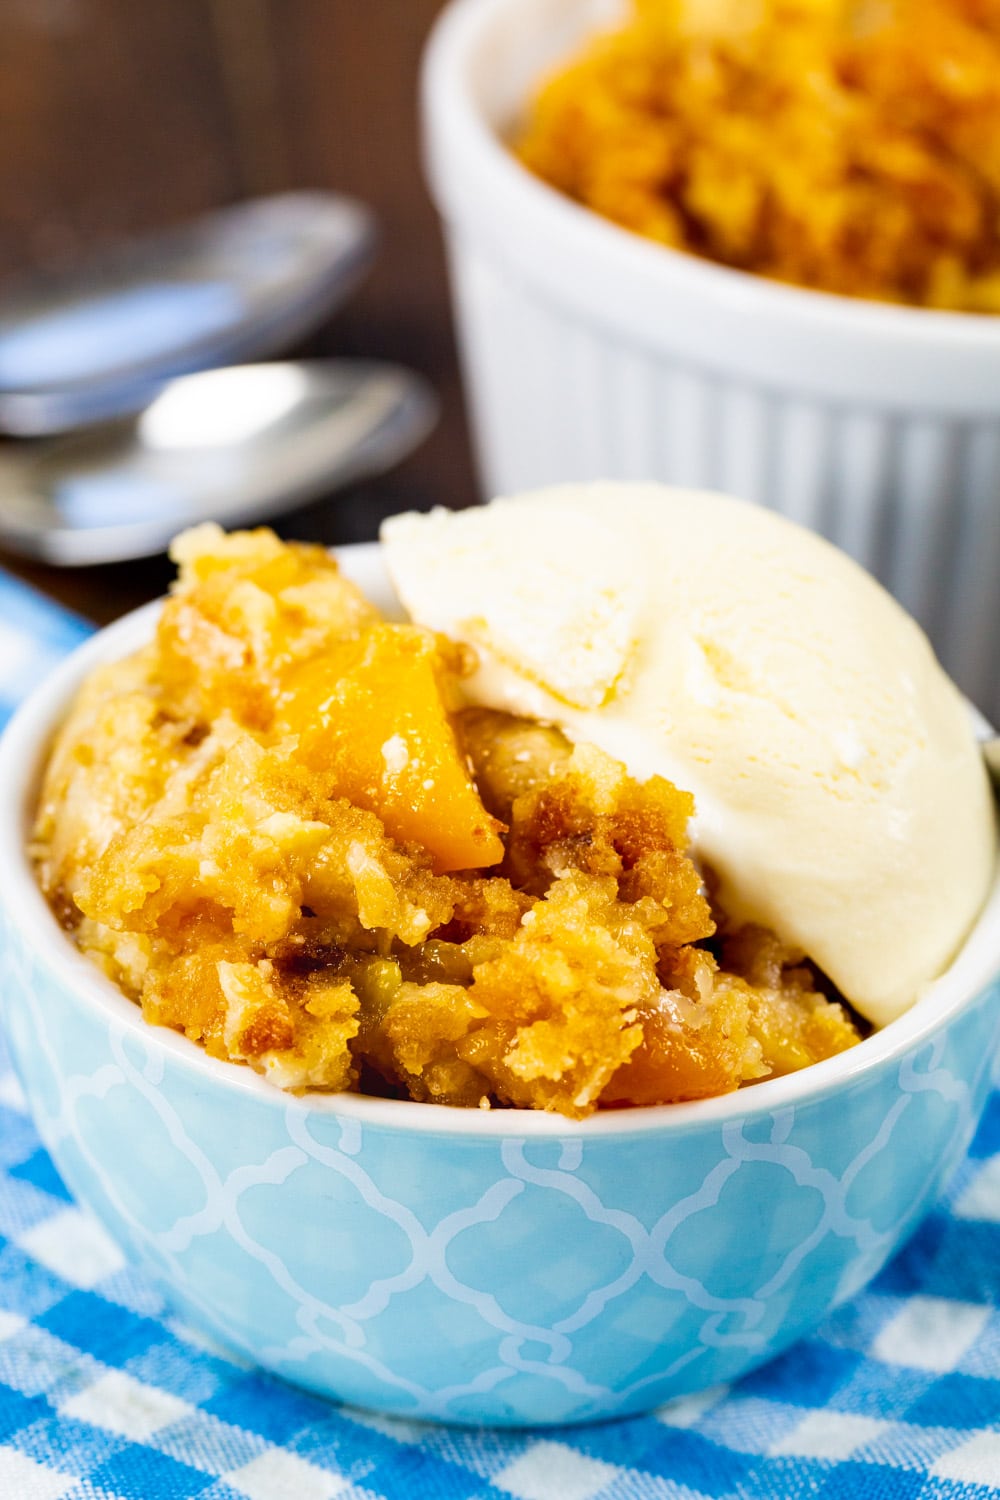 Peaches and Cream Cake topped with ice cream in a bowl.